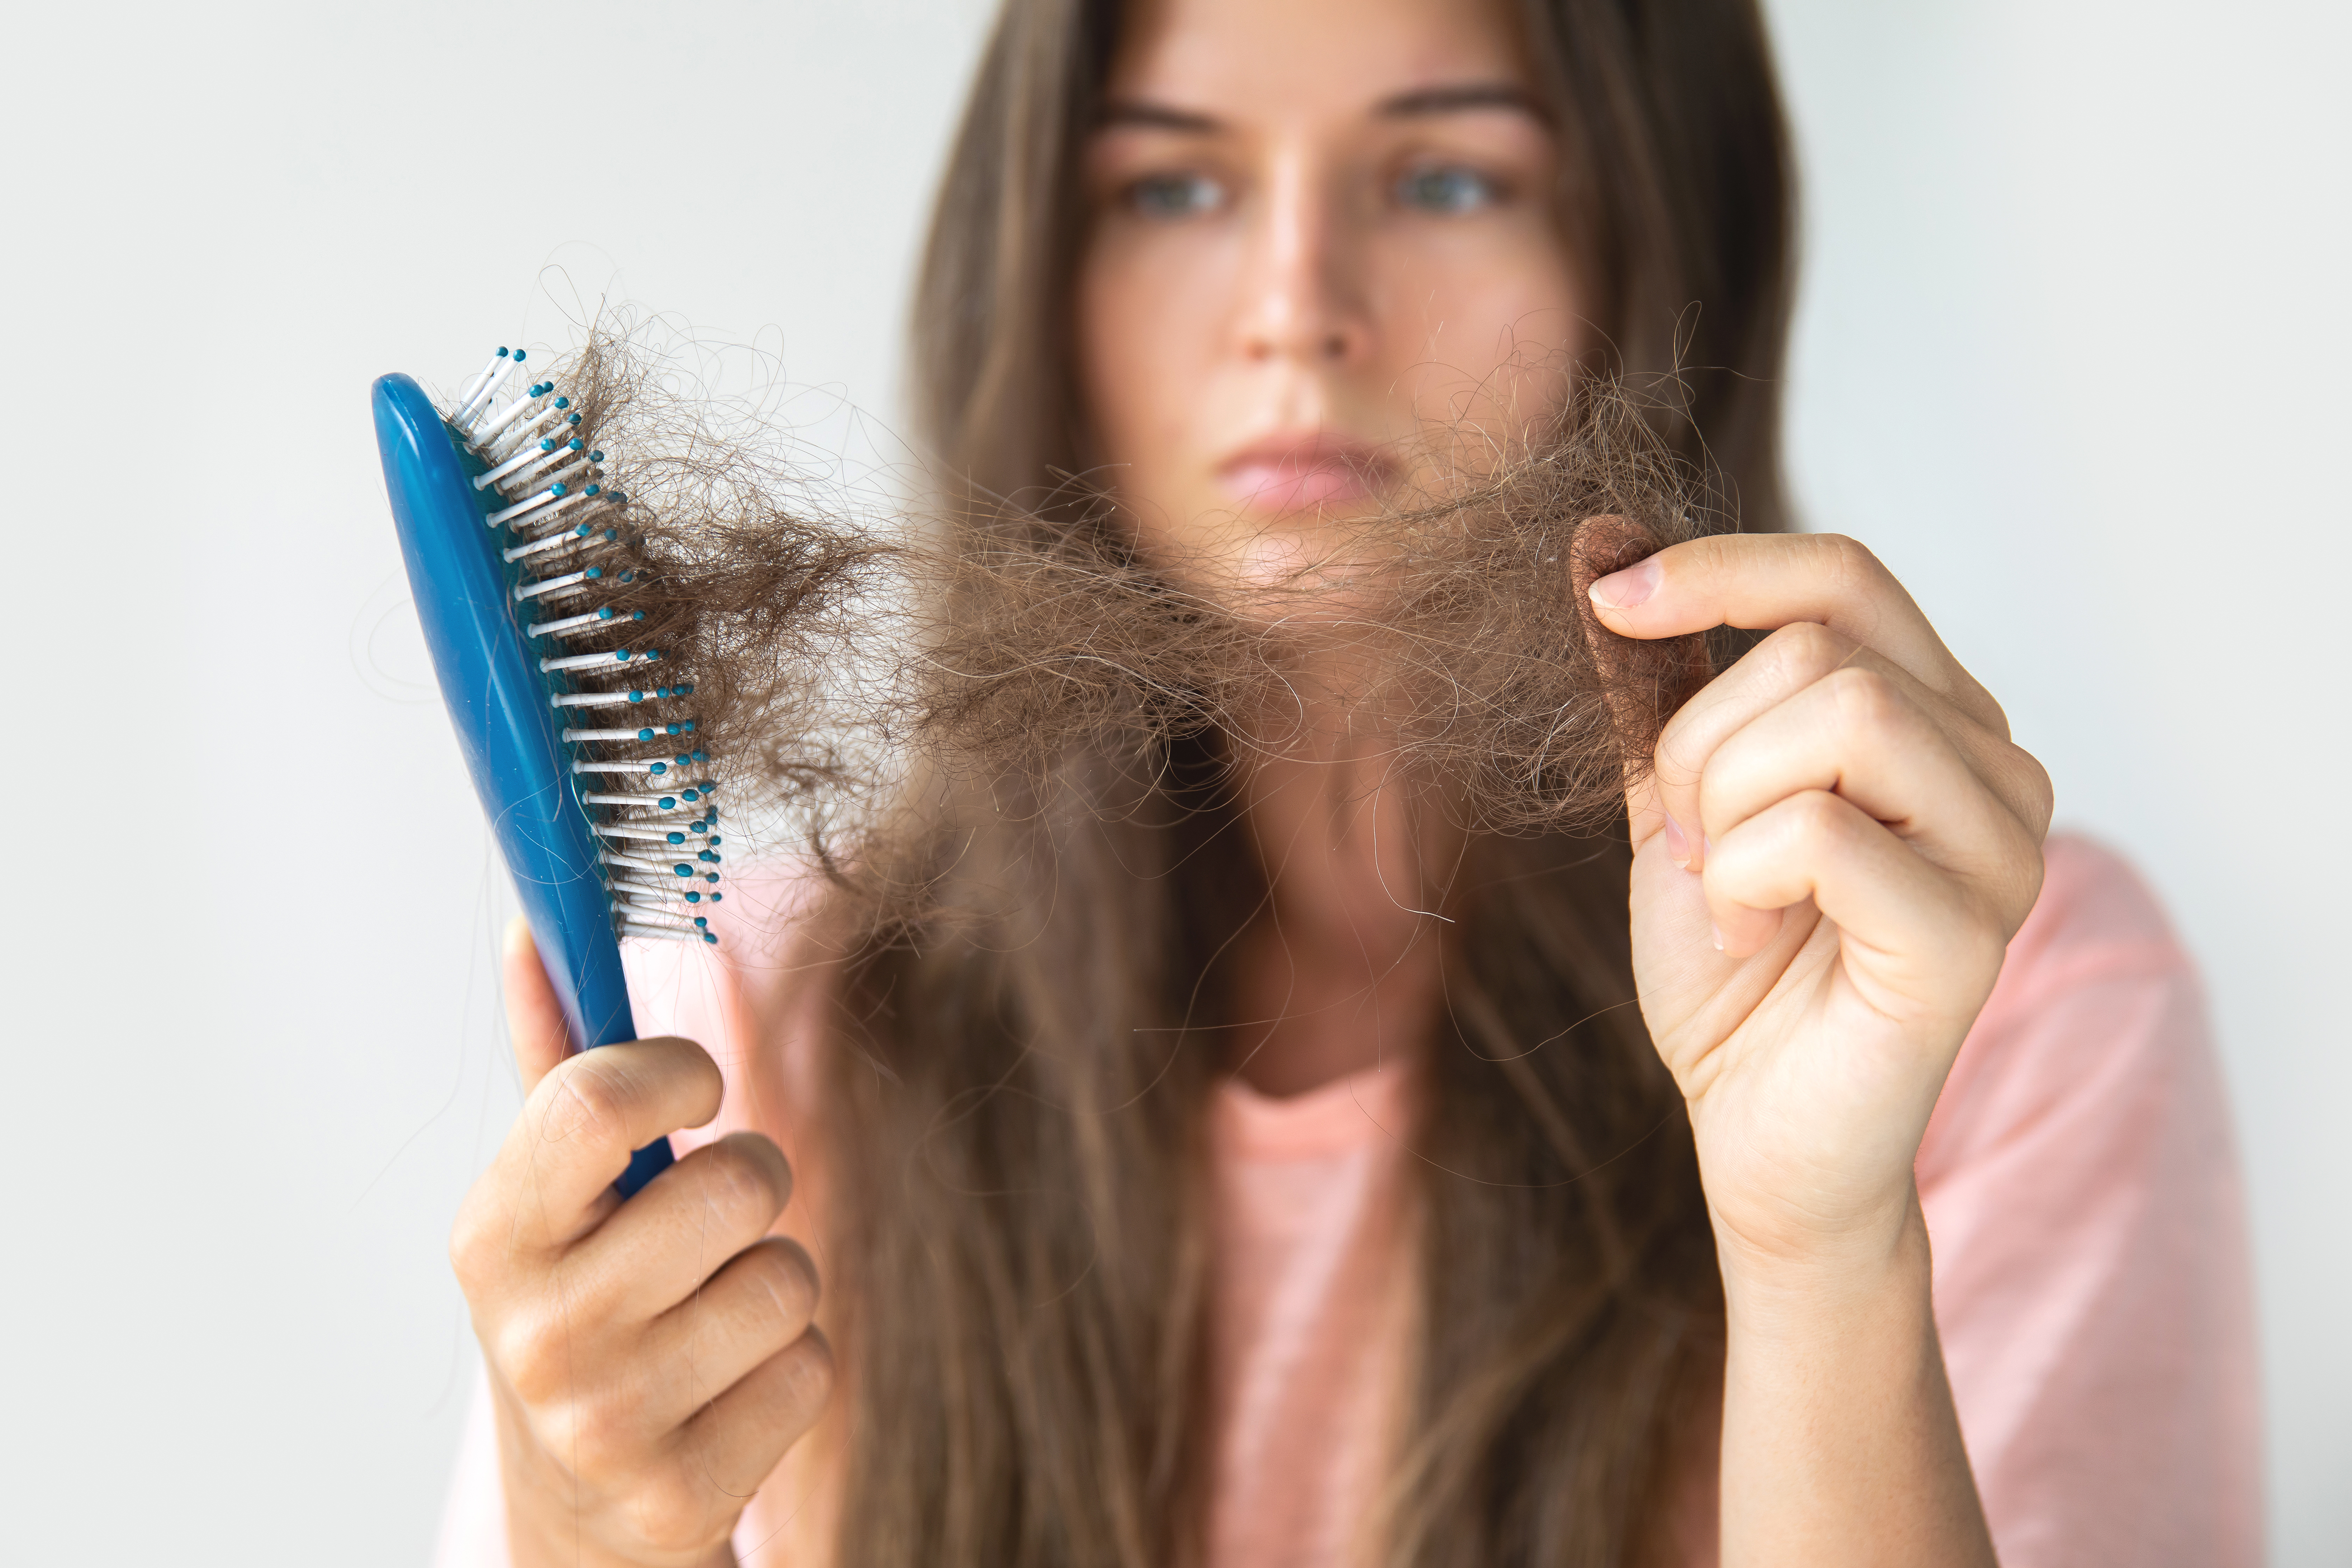 Yes, COVID-19 can cause hair loss | 11alive.com